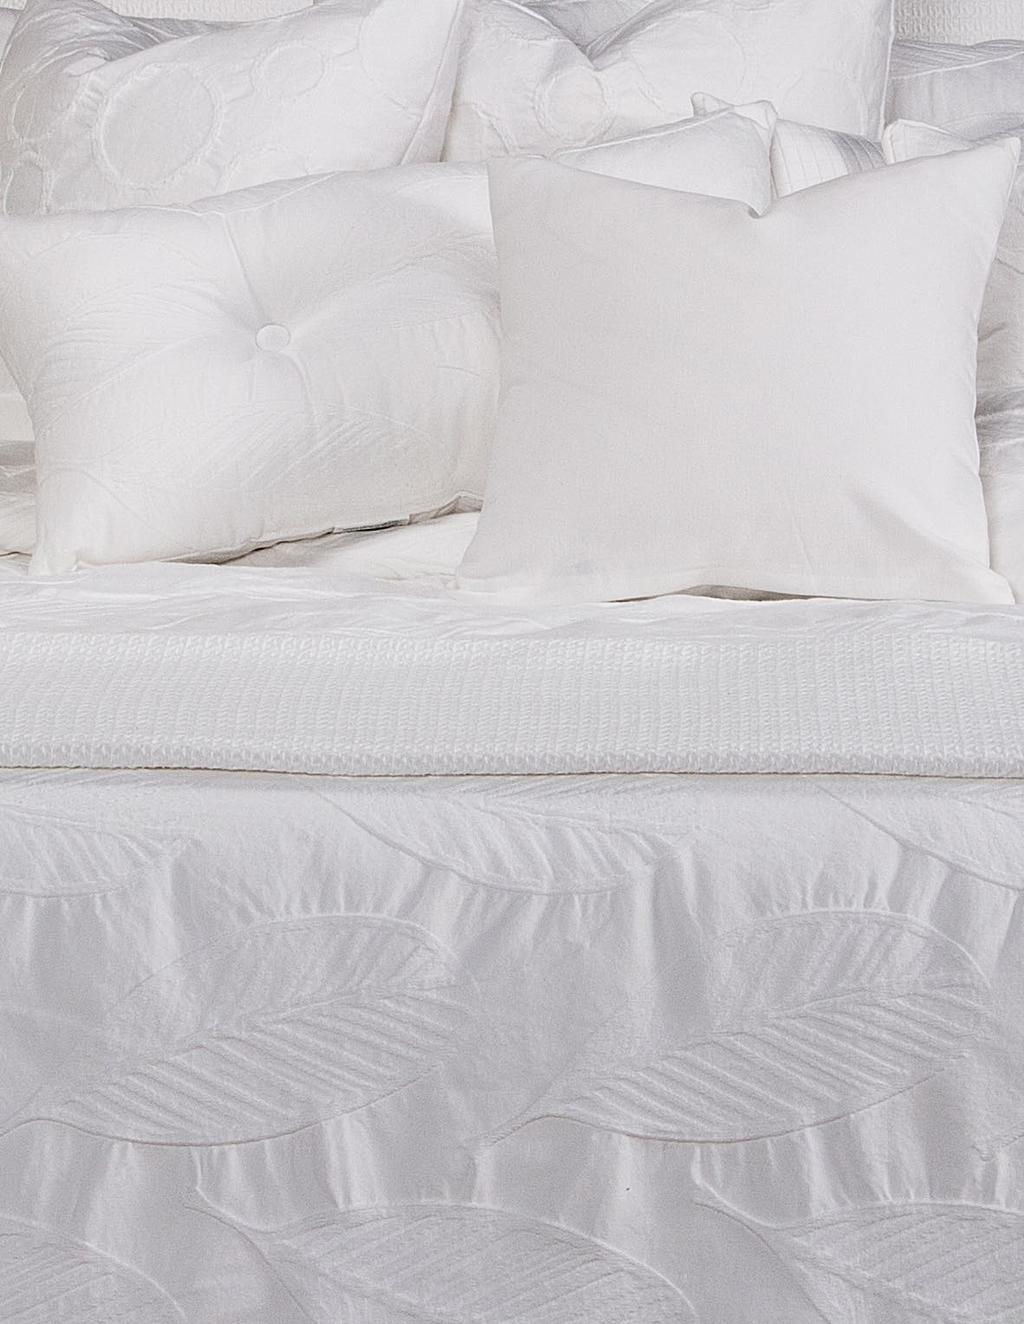 Discover... the best-made bedding brand in the industry. We have what you need.